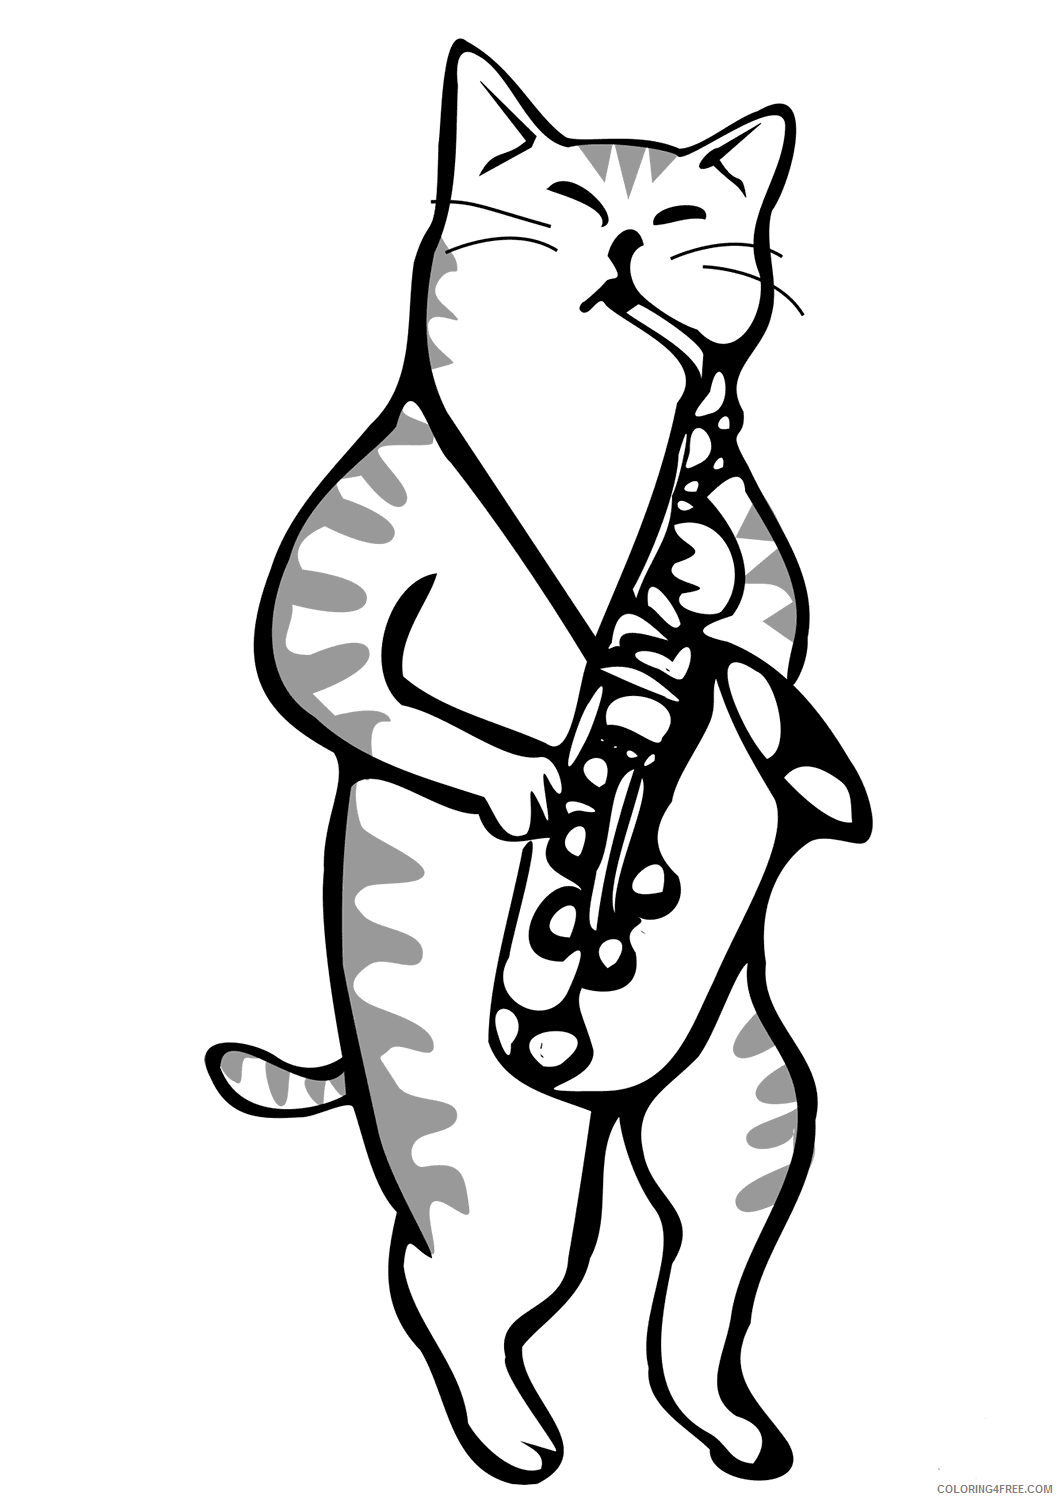 Saxophone Coloring Pages cat playing saxophone Printable 2021 5202 Coloring4free